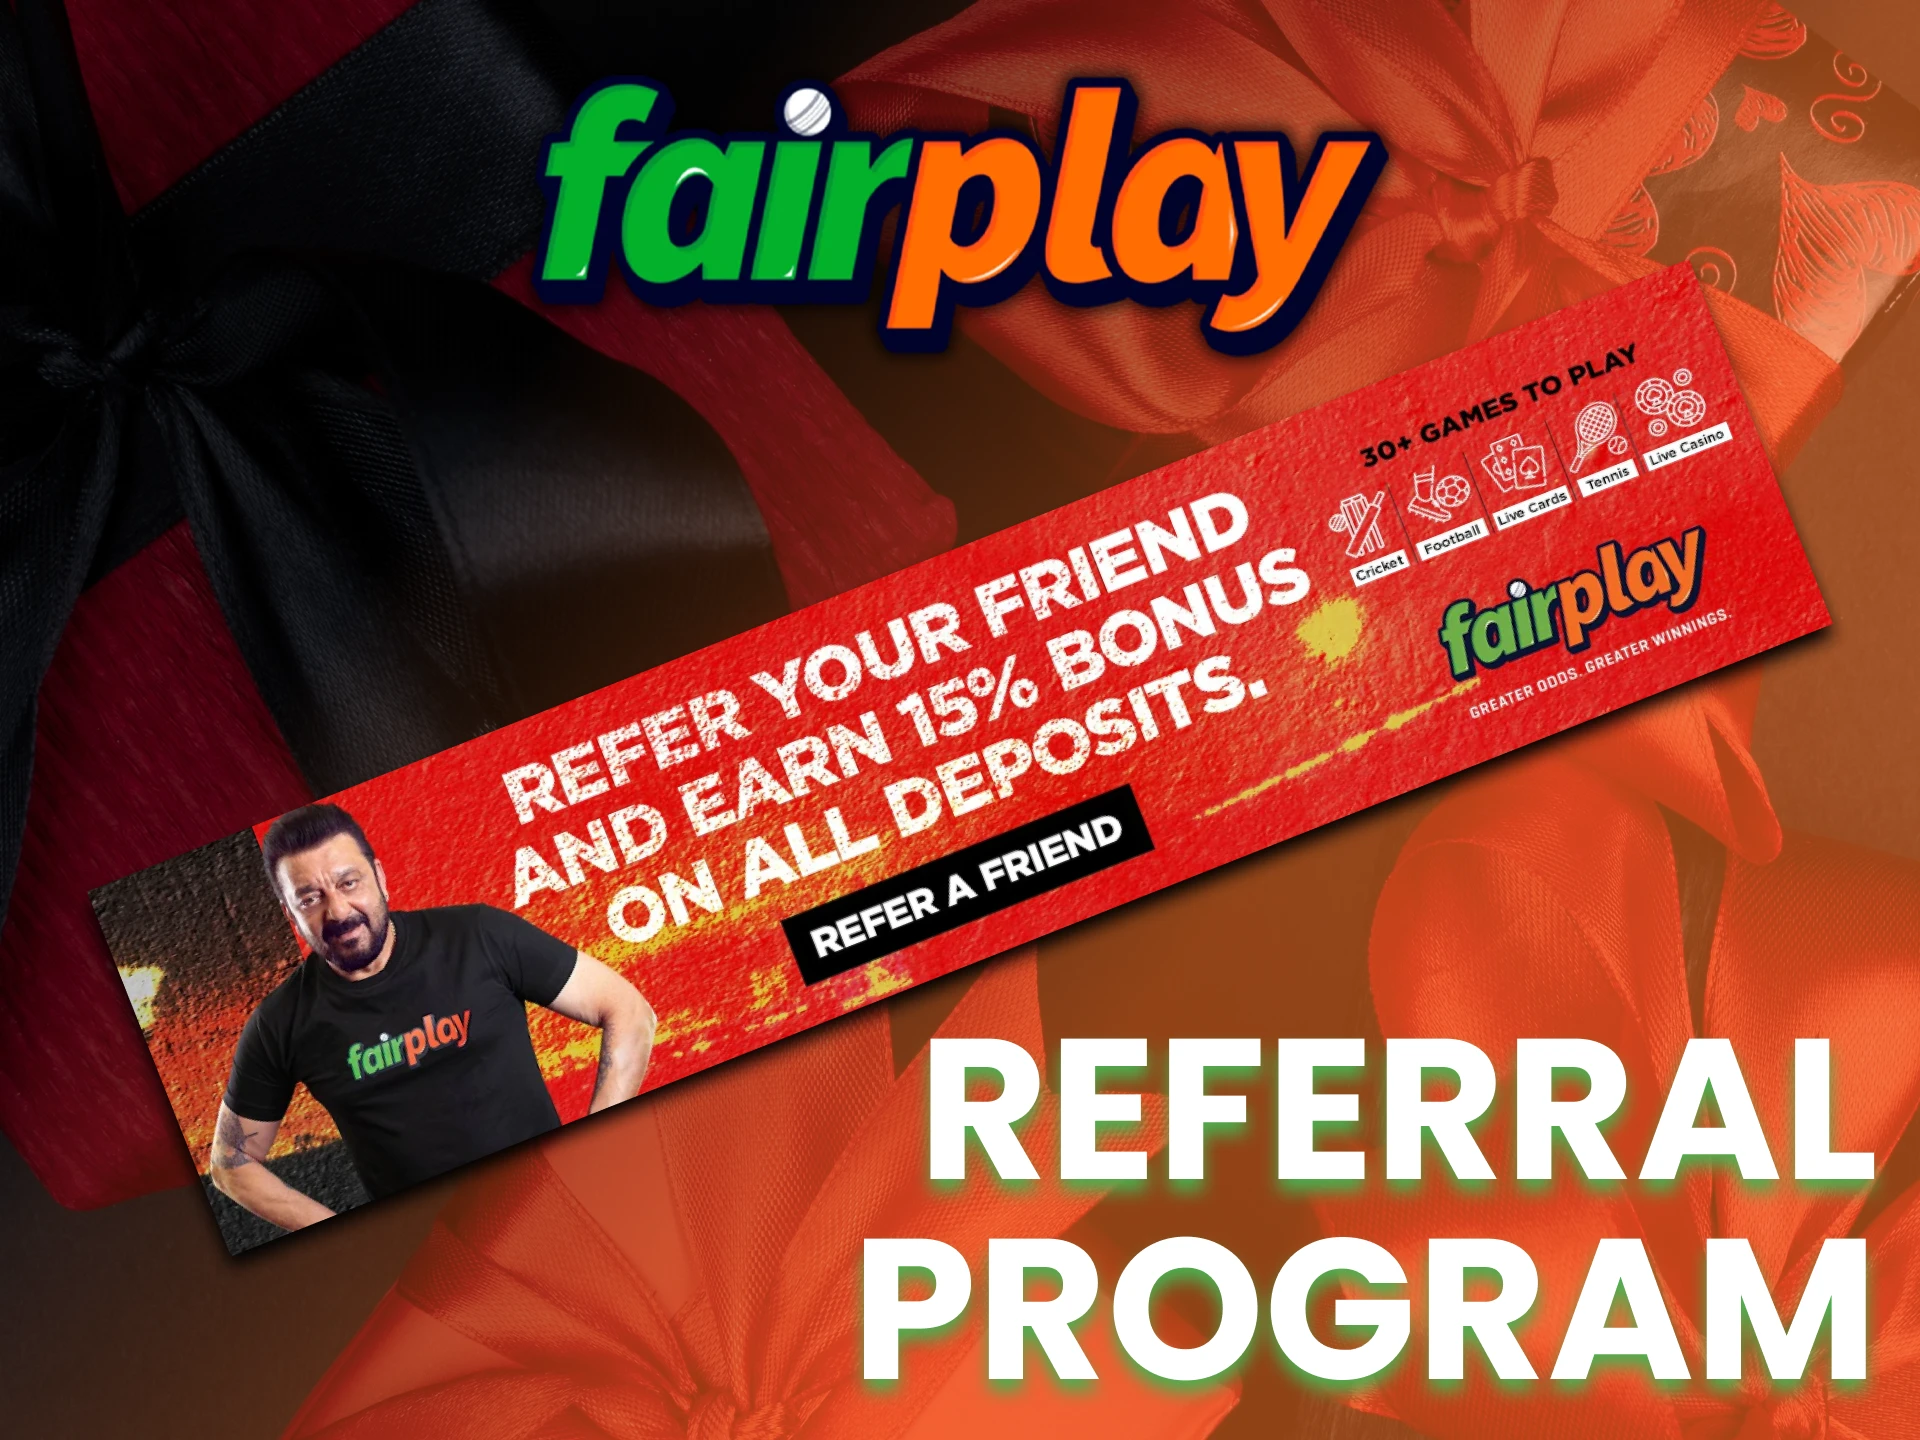 Invite your friends to Fairplay and get bonuses.